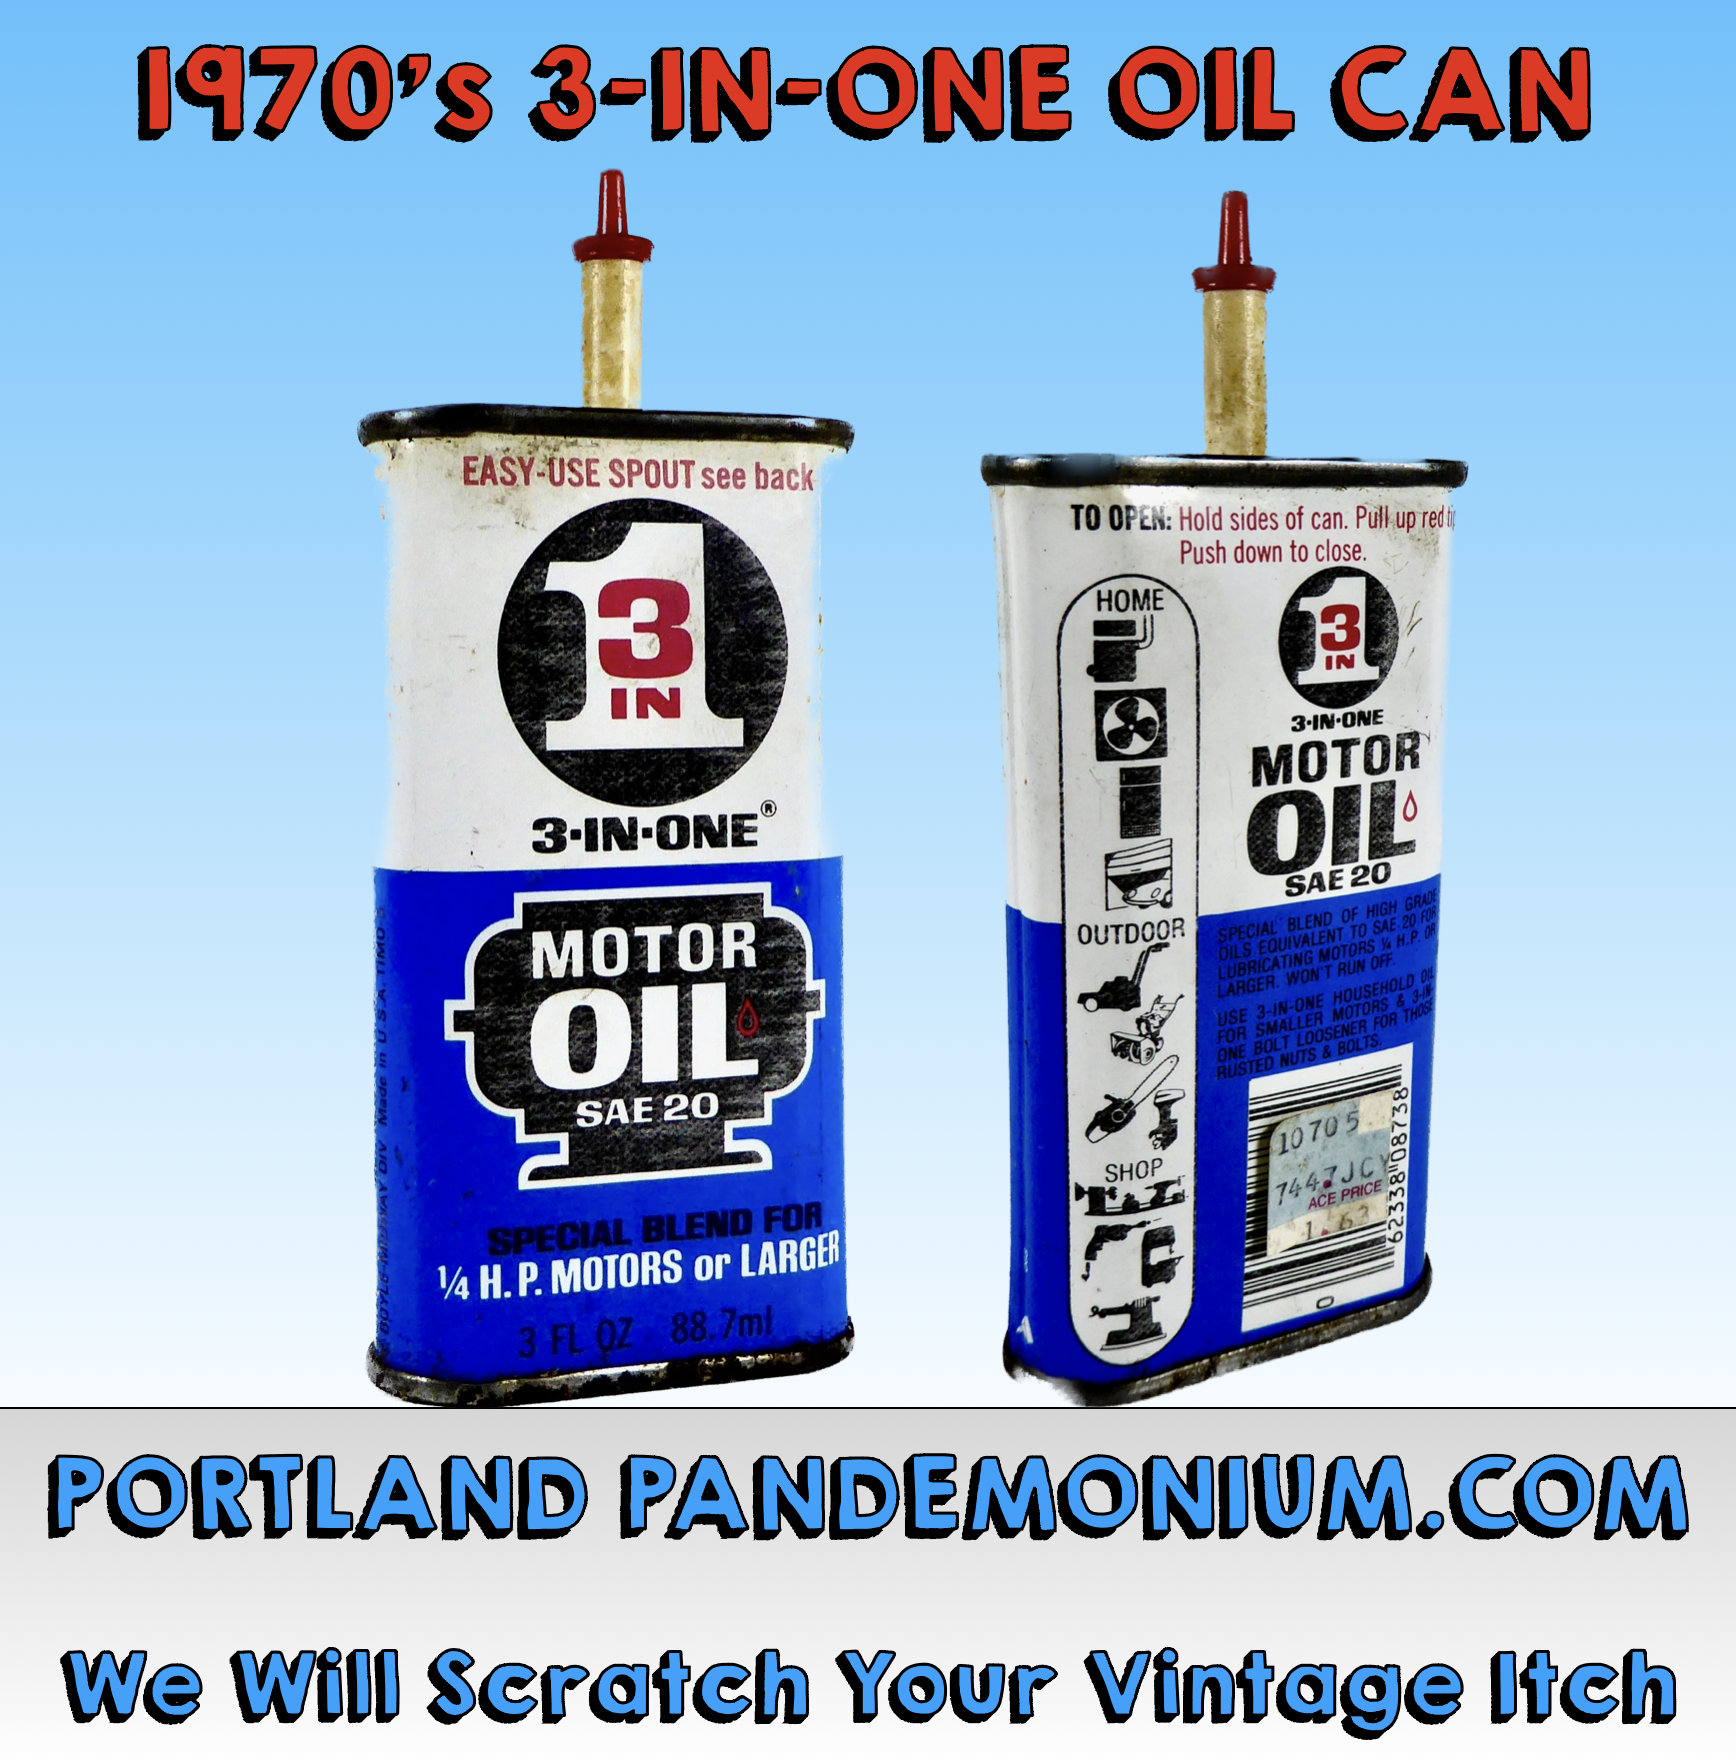 3-IN-ONE® Long Lasting Multi-Purpose Oil 88.7ml and 236ml - 3-IN-ONE®